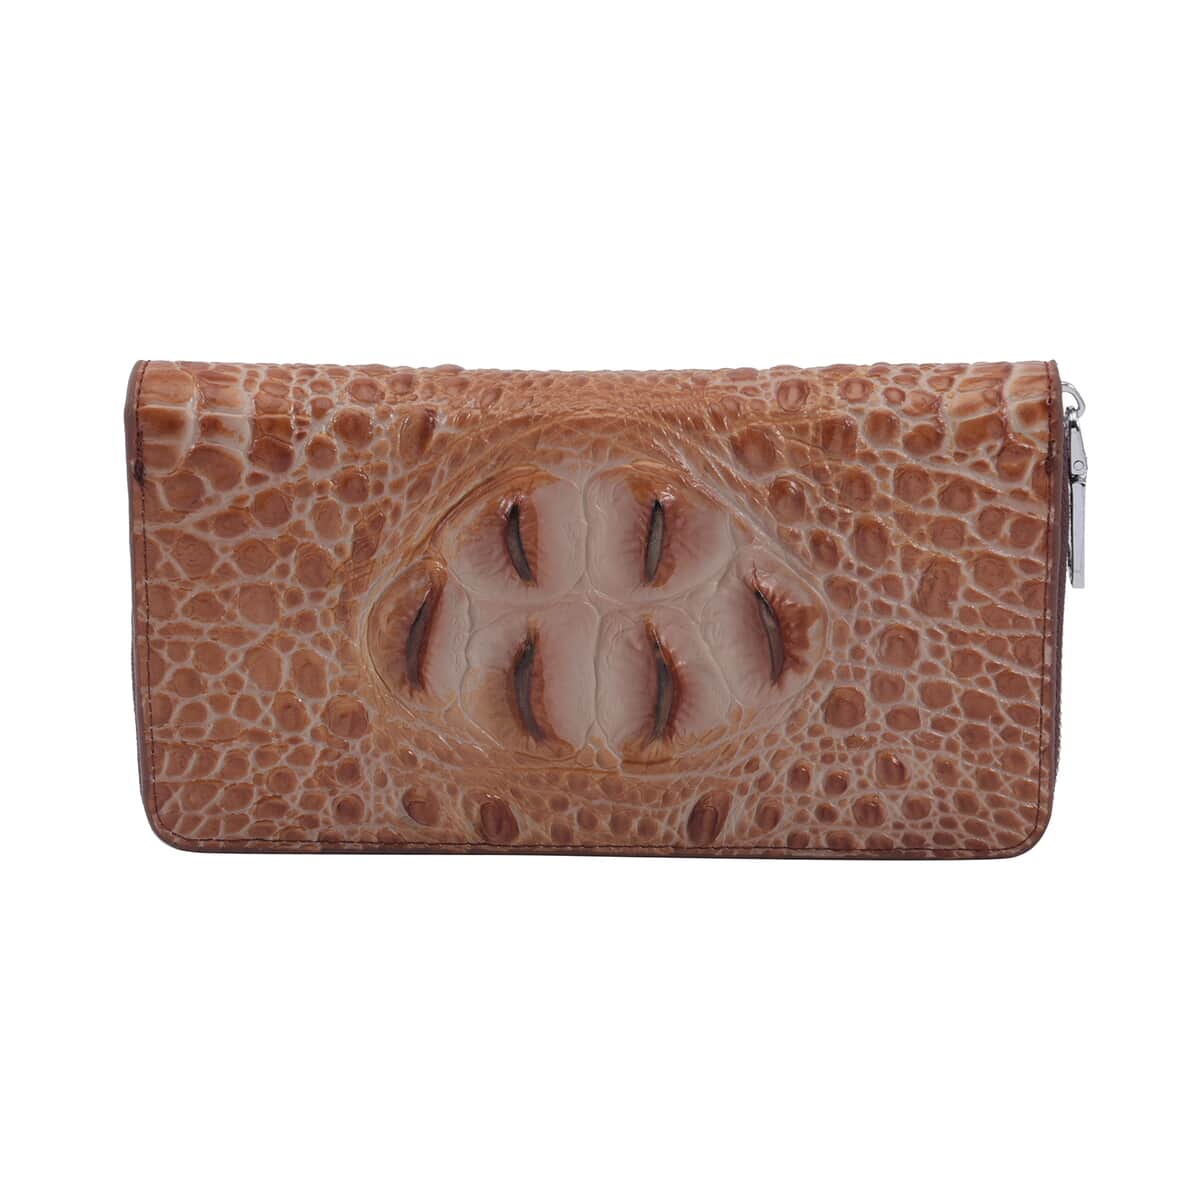 Black Croc Embossed Genuine Leather Wallet (8.3"x1.2"x4.7") with Single Zipped image number 0